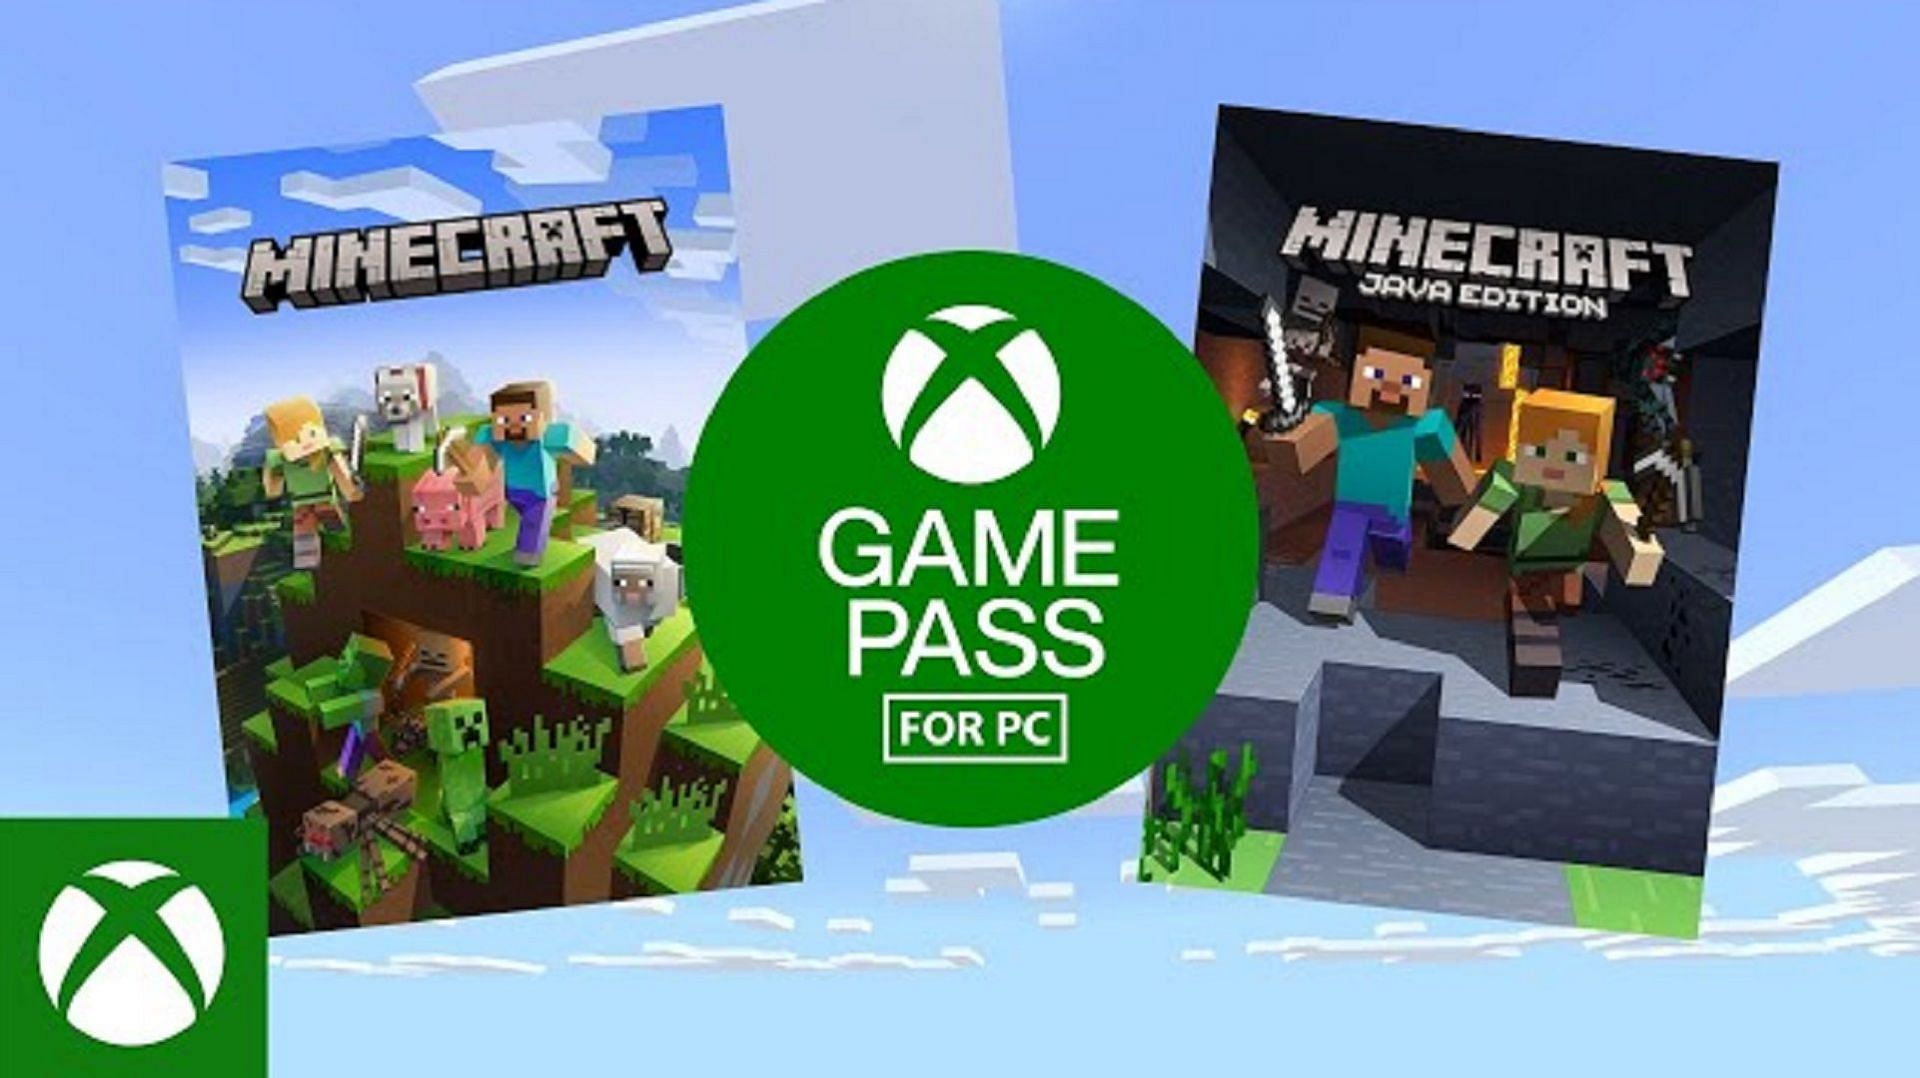 PC gamers can enjoy both versions of the game via Xbox Game Pass (Image by Mojang/Microsoft)